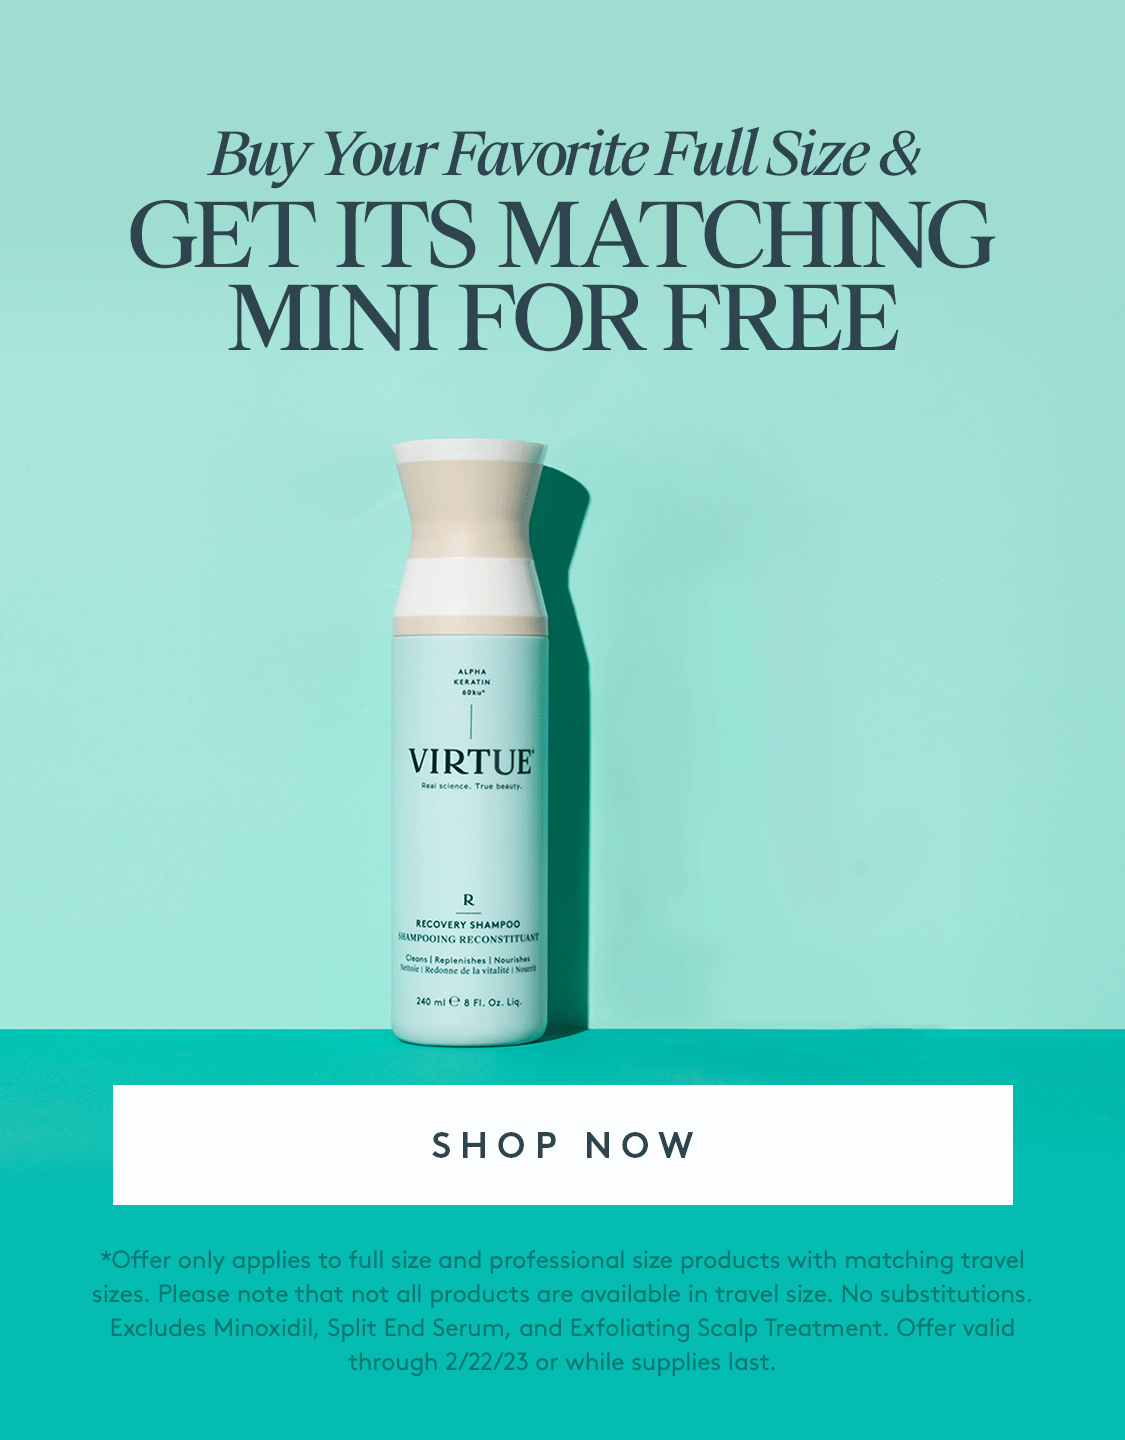 Buy Your Favorite Full Size & Get Its Matching Mini For Free